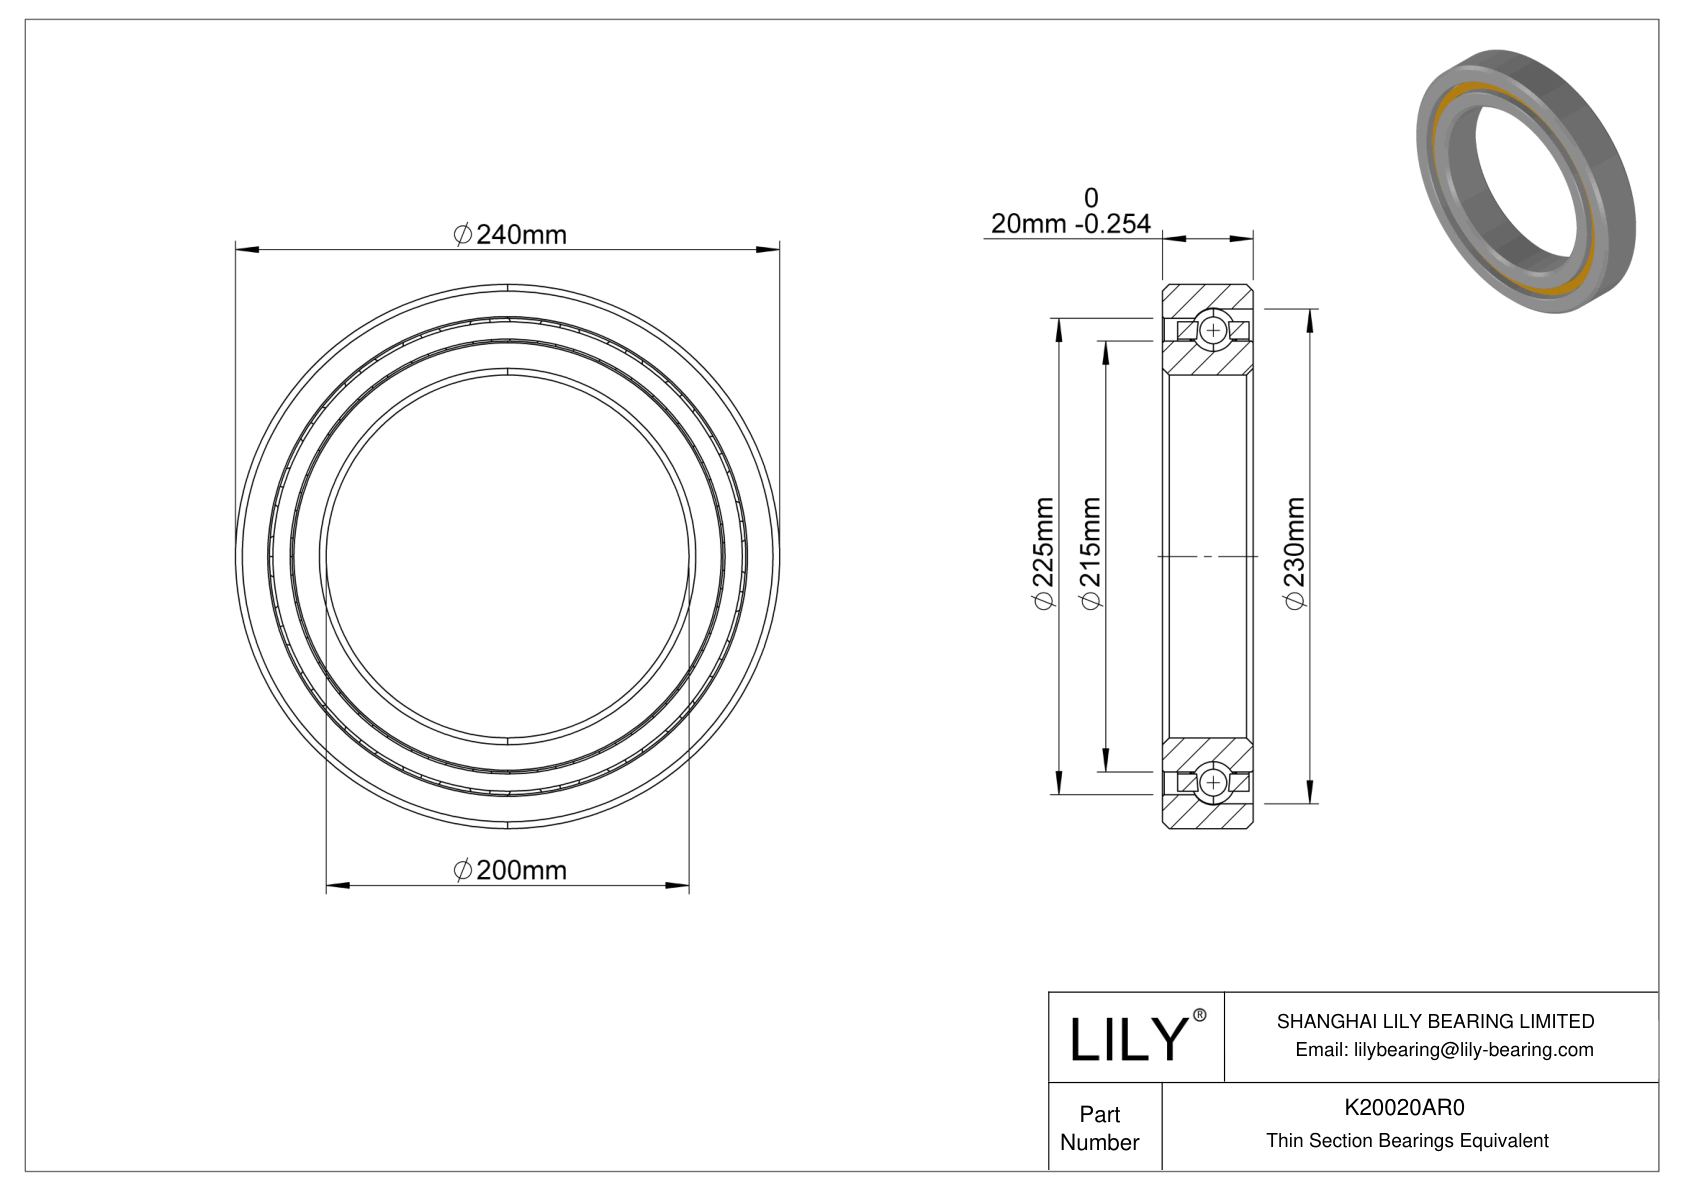 K20020AR0 Constant Section (CS) Bearings cad drawing